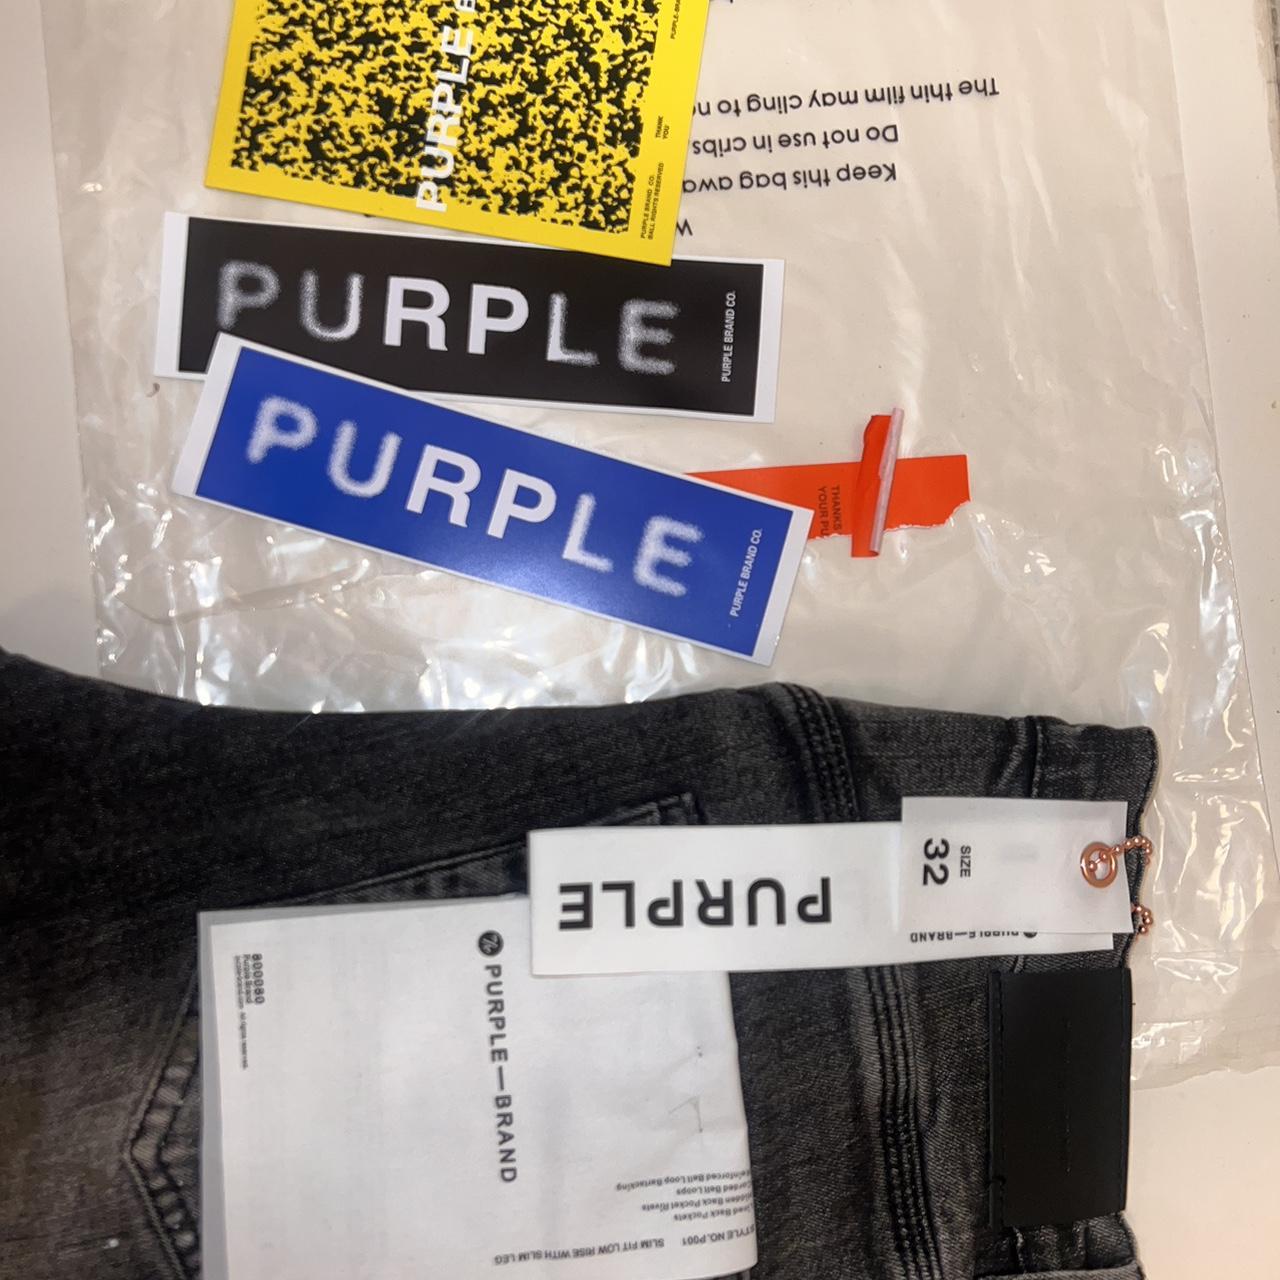 Brand new purple jeans comes with all the tags even - Depop